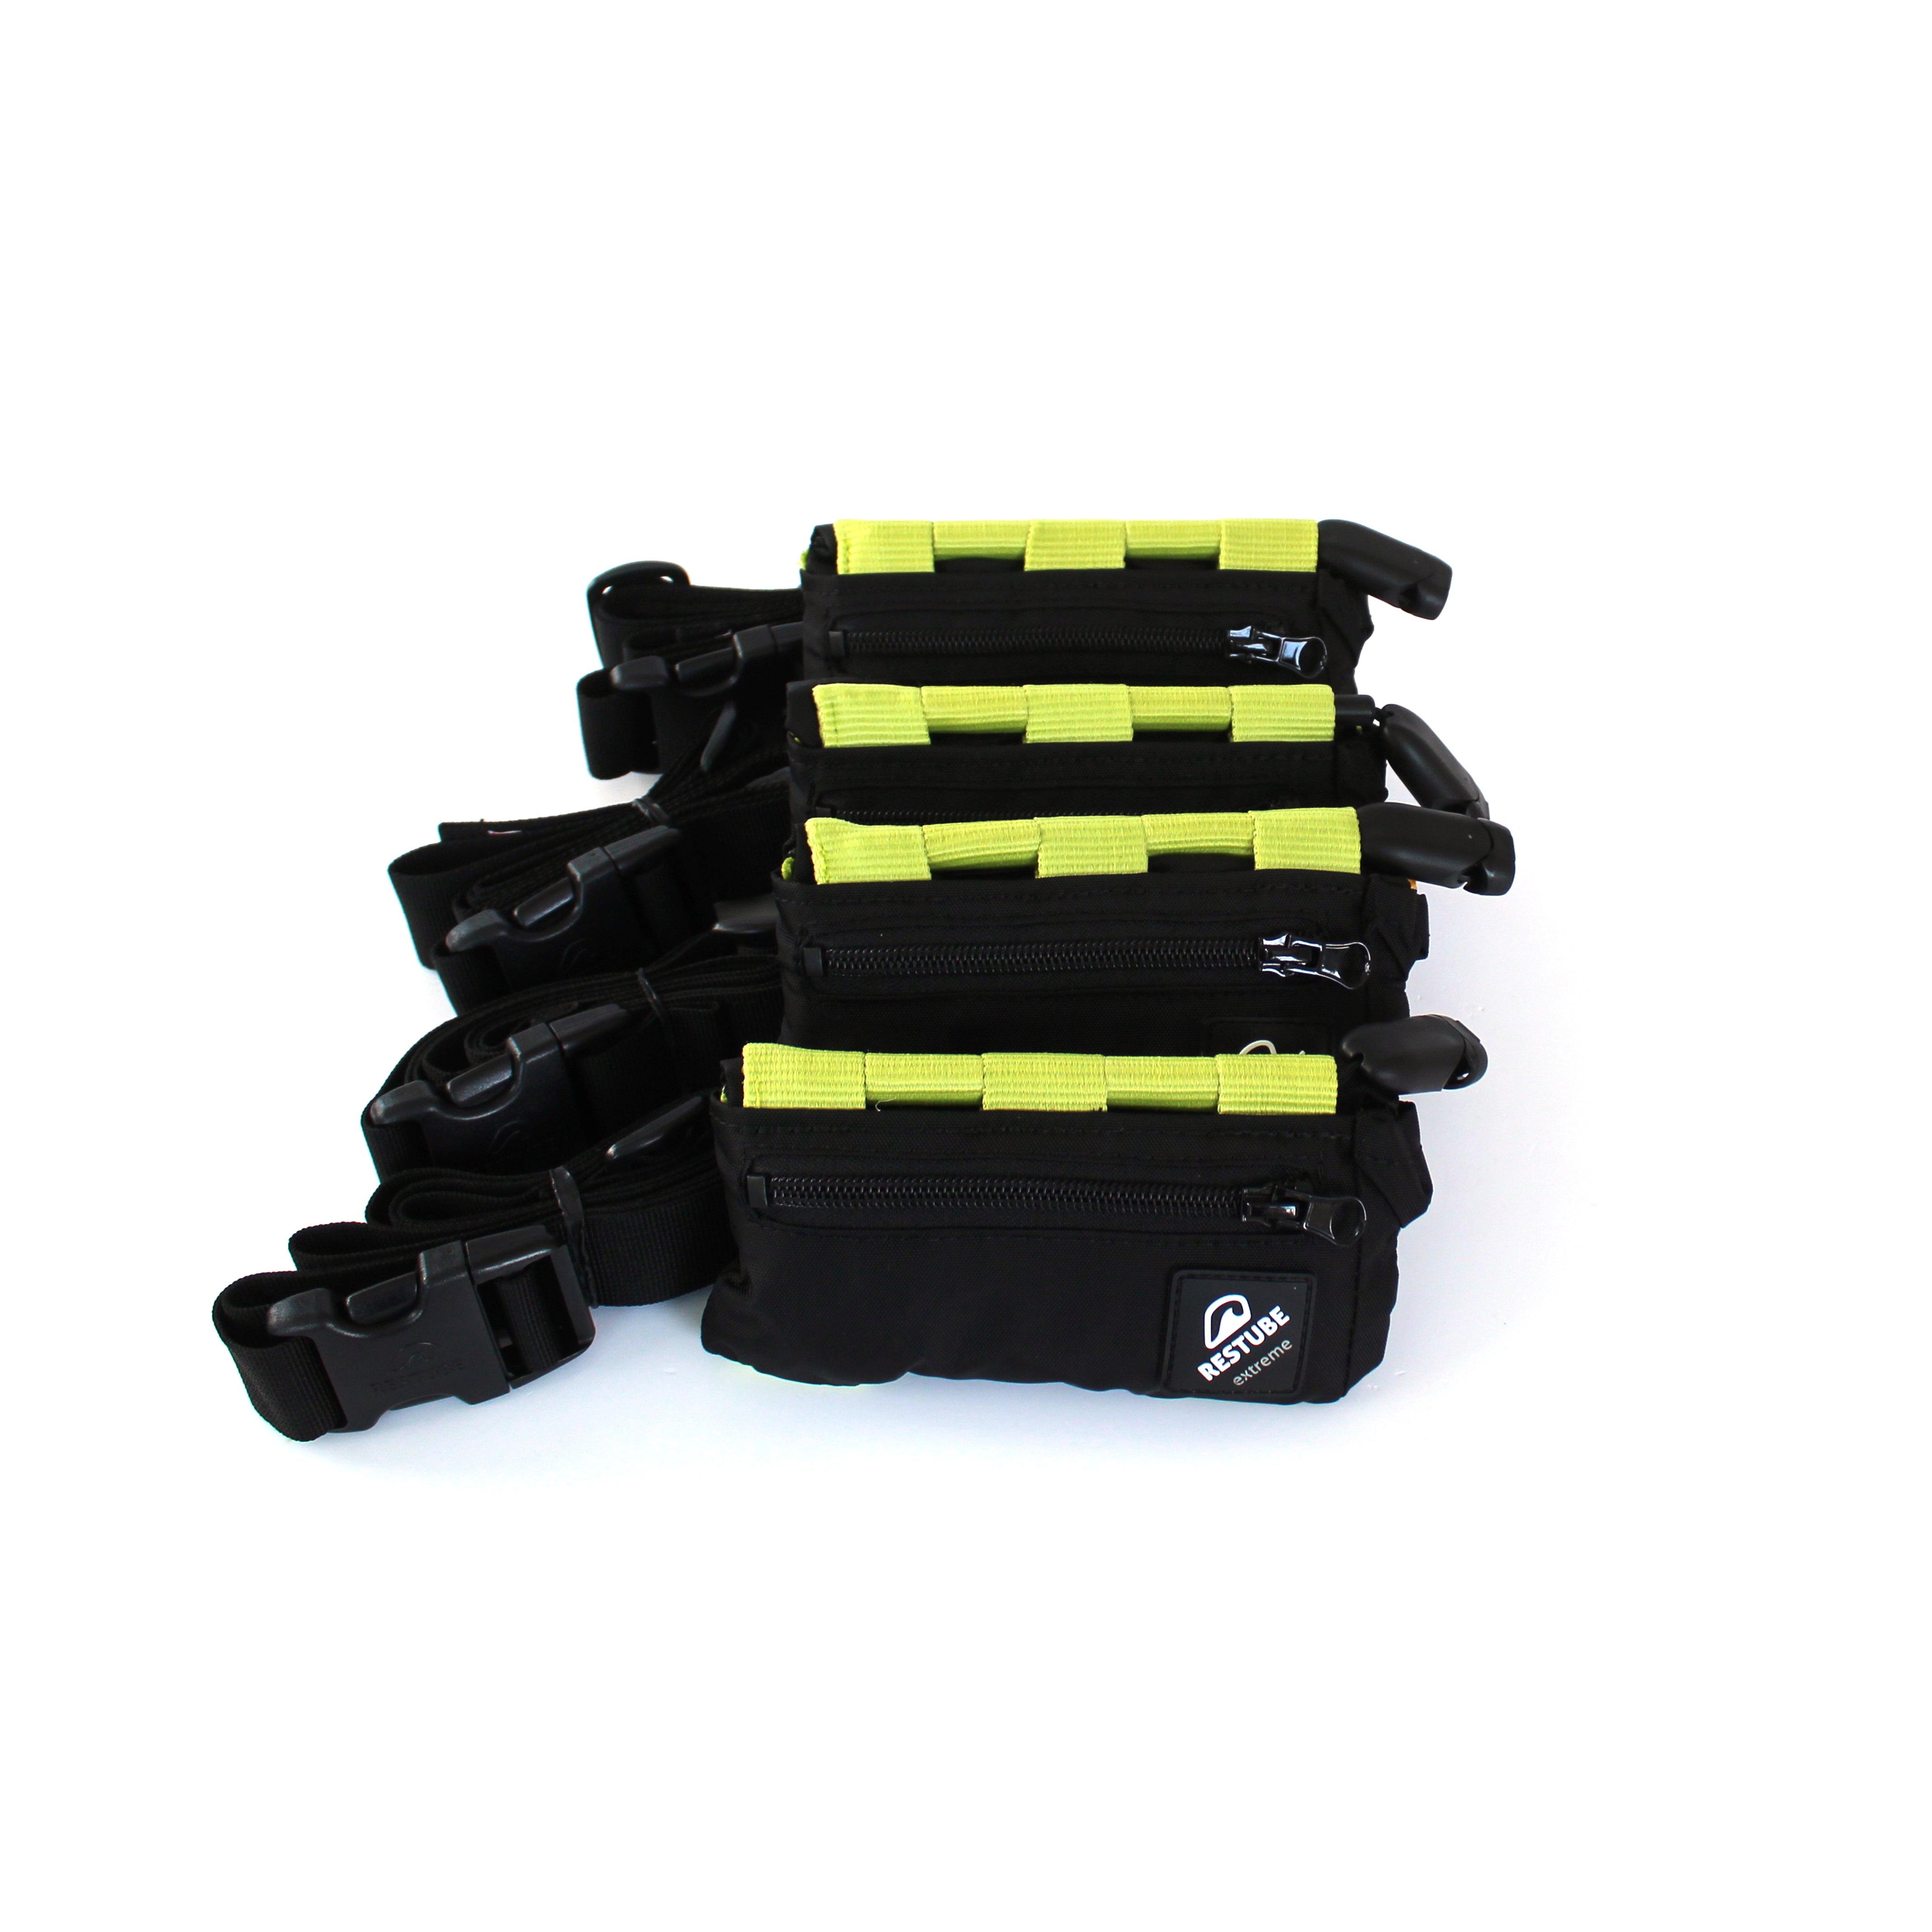 Four restube extreme in black, yellow pouches and black belt